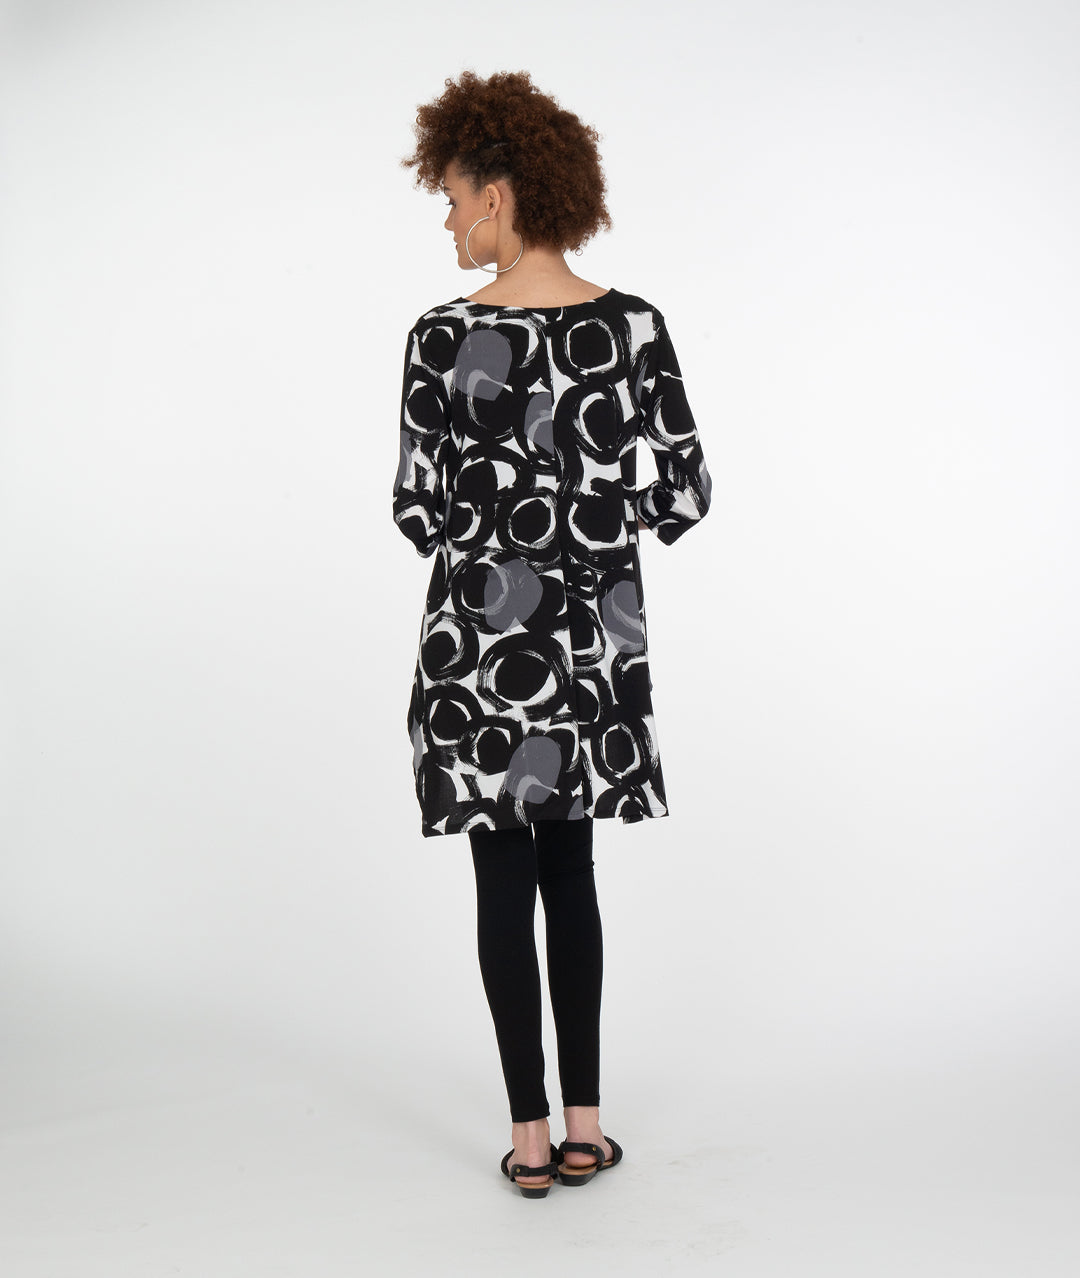 model in black leggings with a black, white and grey circle print tunic with a high-low hem and a vneck